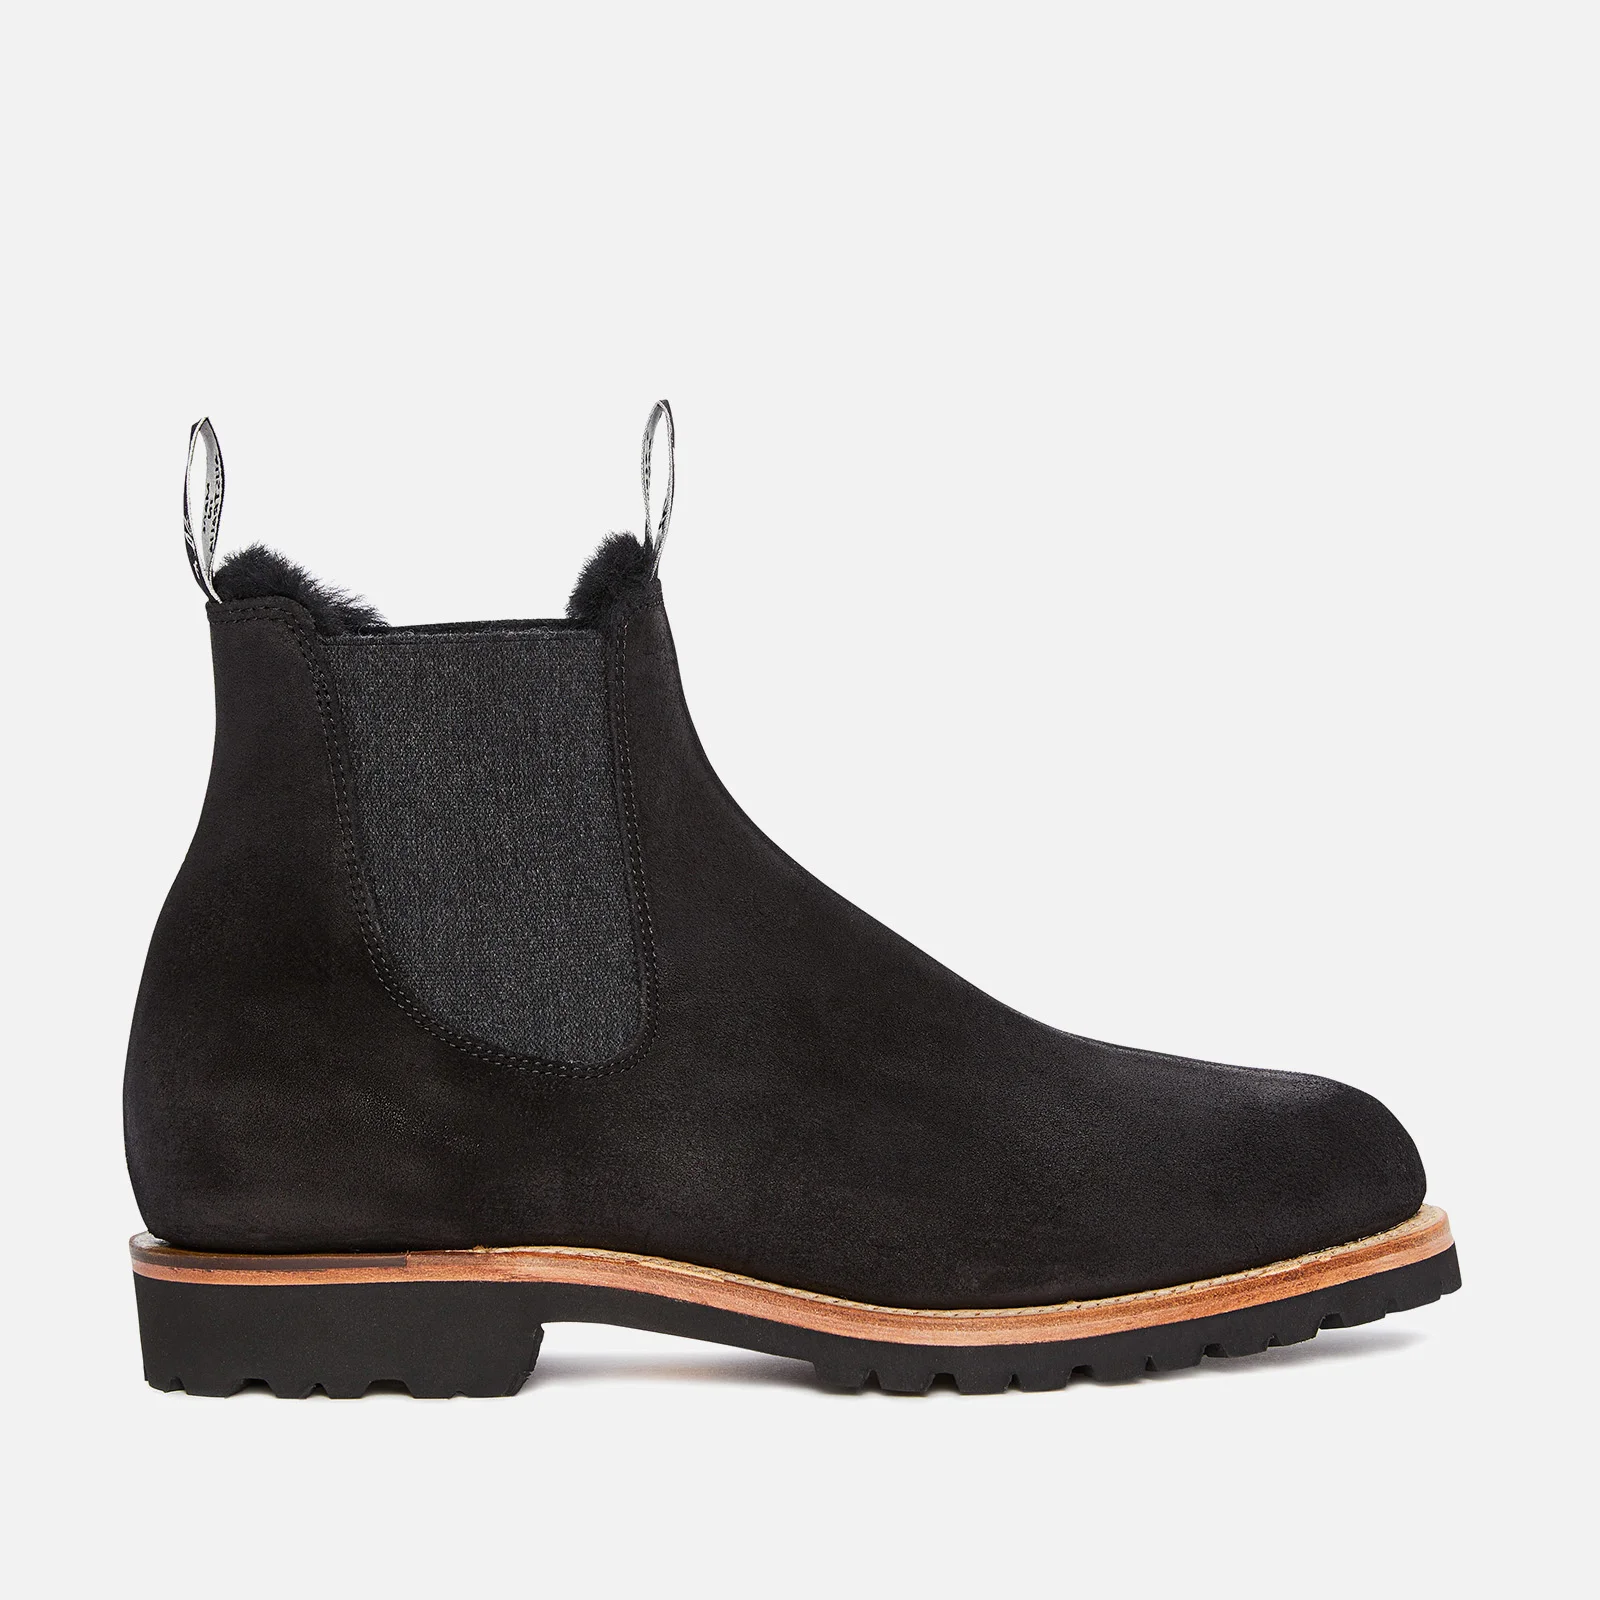 R.M. Williams Men's Urban Gardener Suede/Shearling Lined Chelsea Boots - Black Image 1